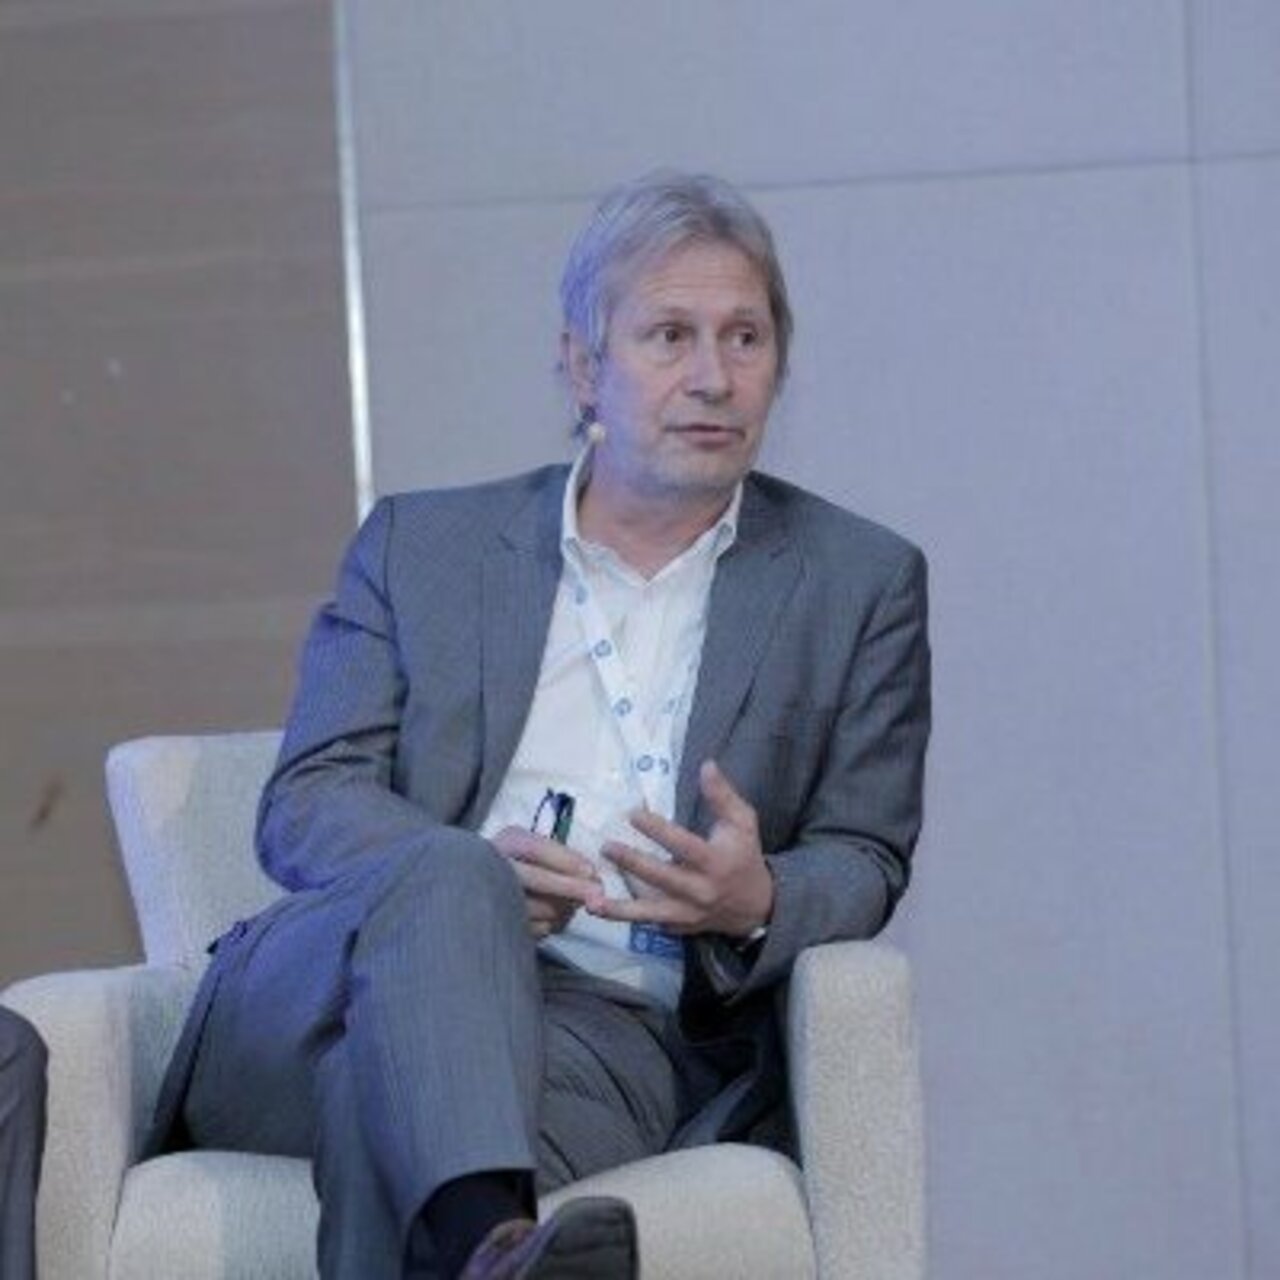 From @HP we have Wilfried Grommen @wilgrom Chief Technology Officer http://ow.ly/YEBfg for #futuretechnologies https://t.co/xmN2yWXV9o